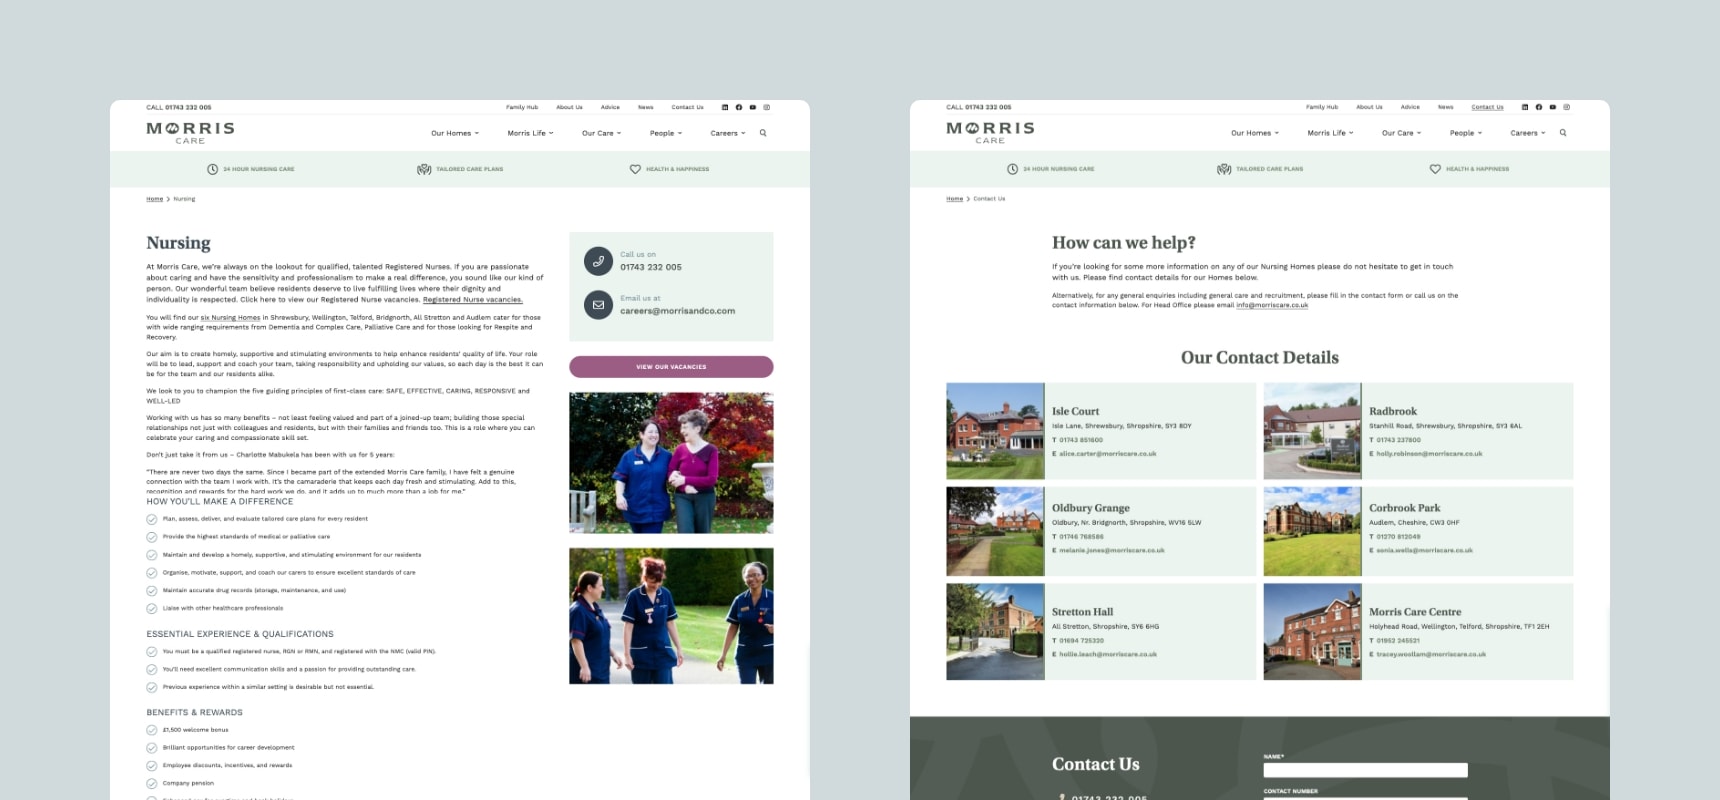 Desktop website design of the nursing and contact pages